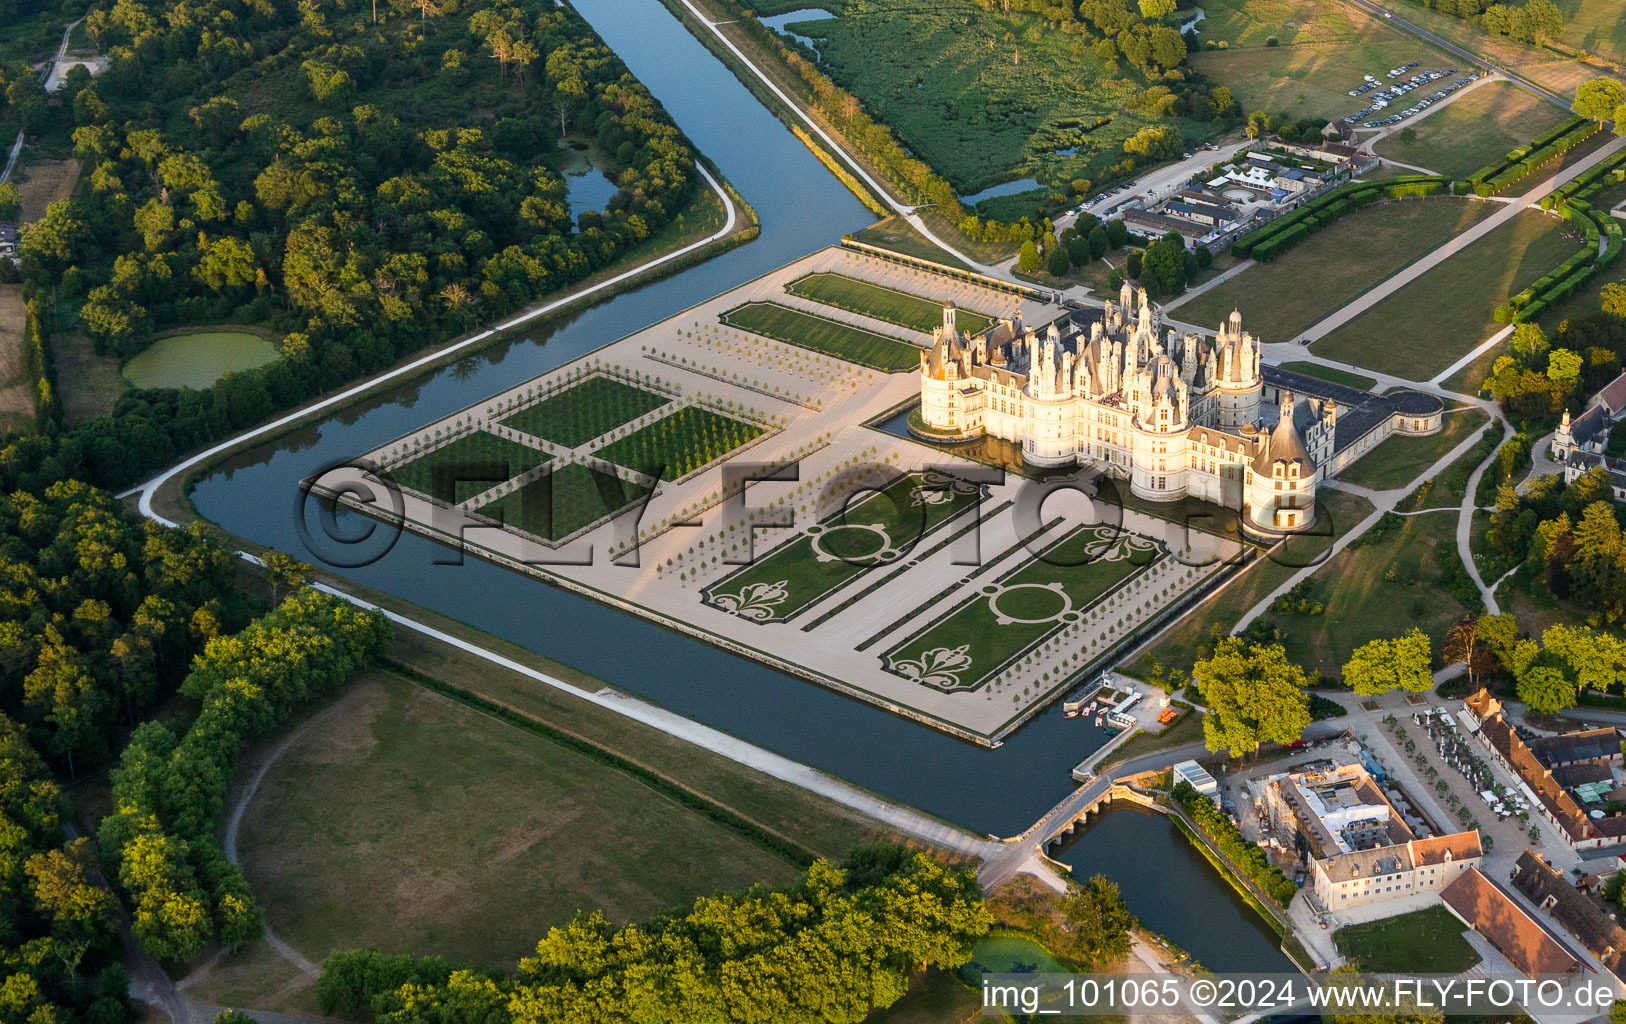 Aerial view of Channels and Building complex in the park of the castle Schloss Chambord in Chambord in Centre-Val de Loire, France